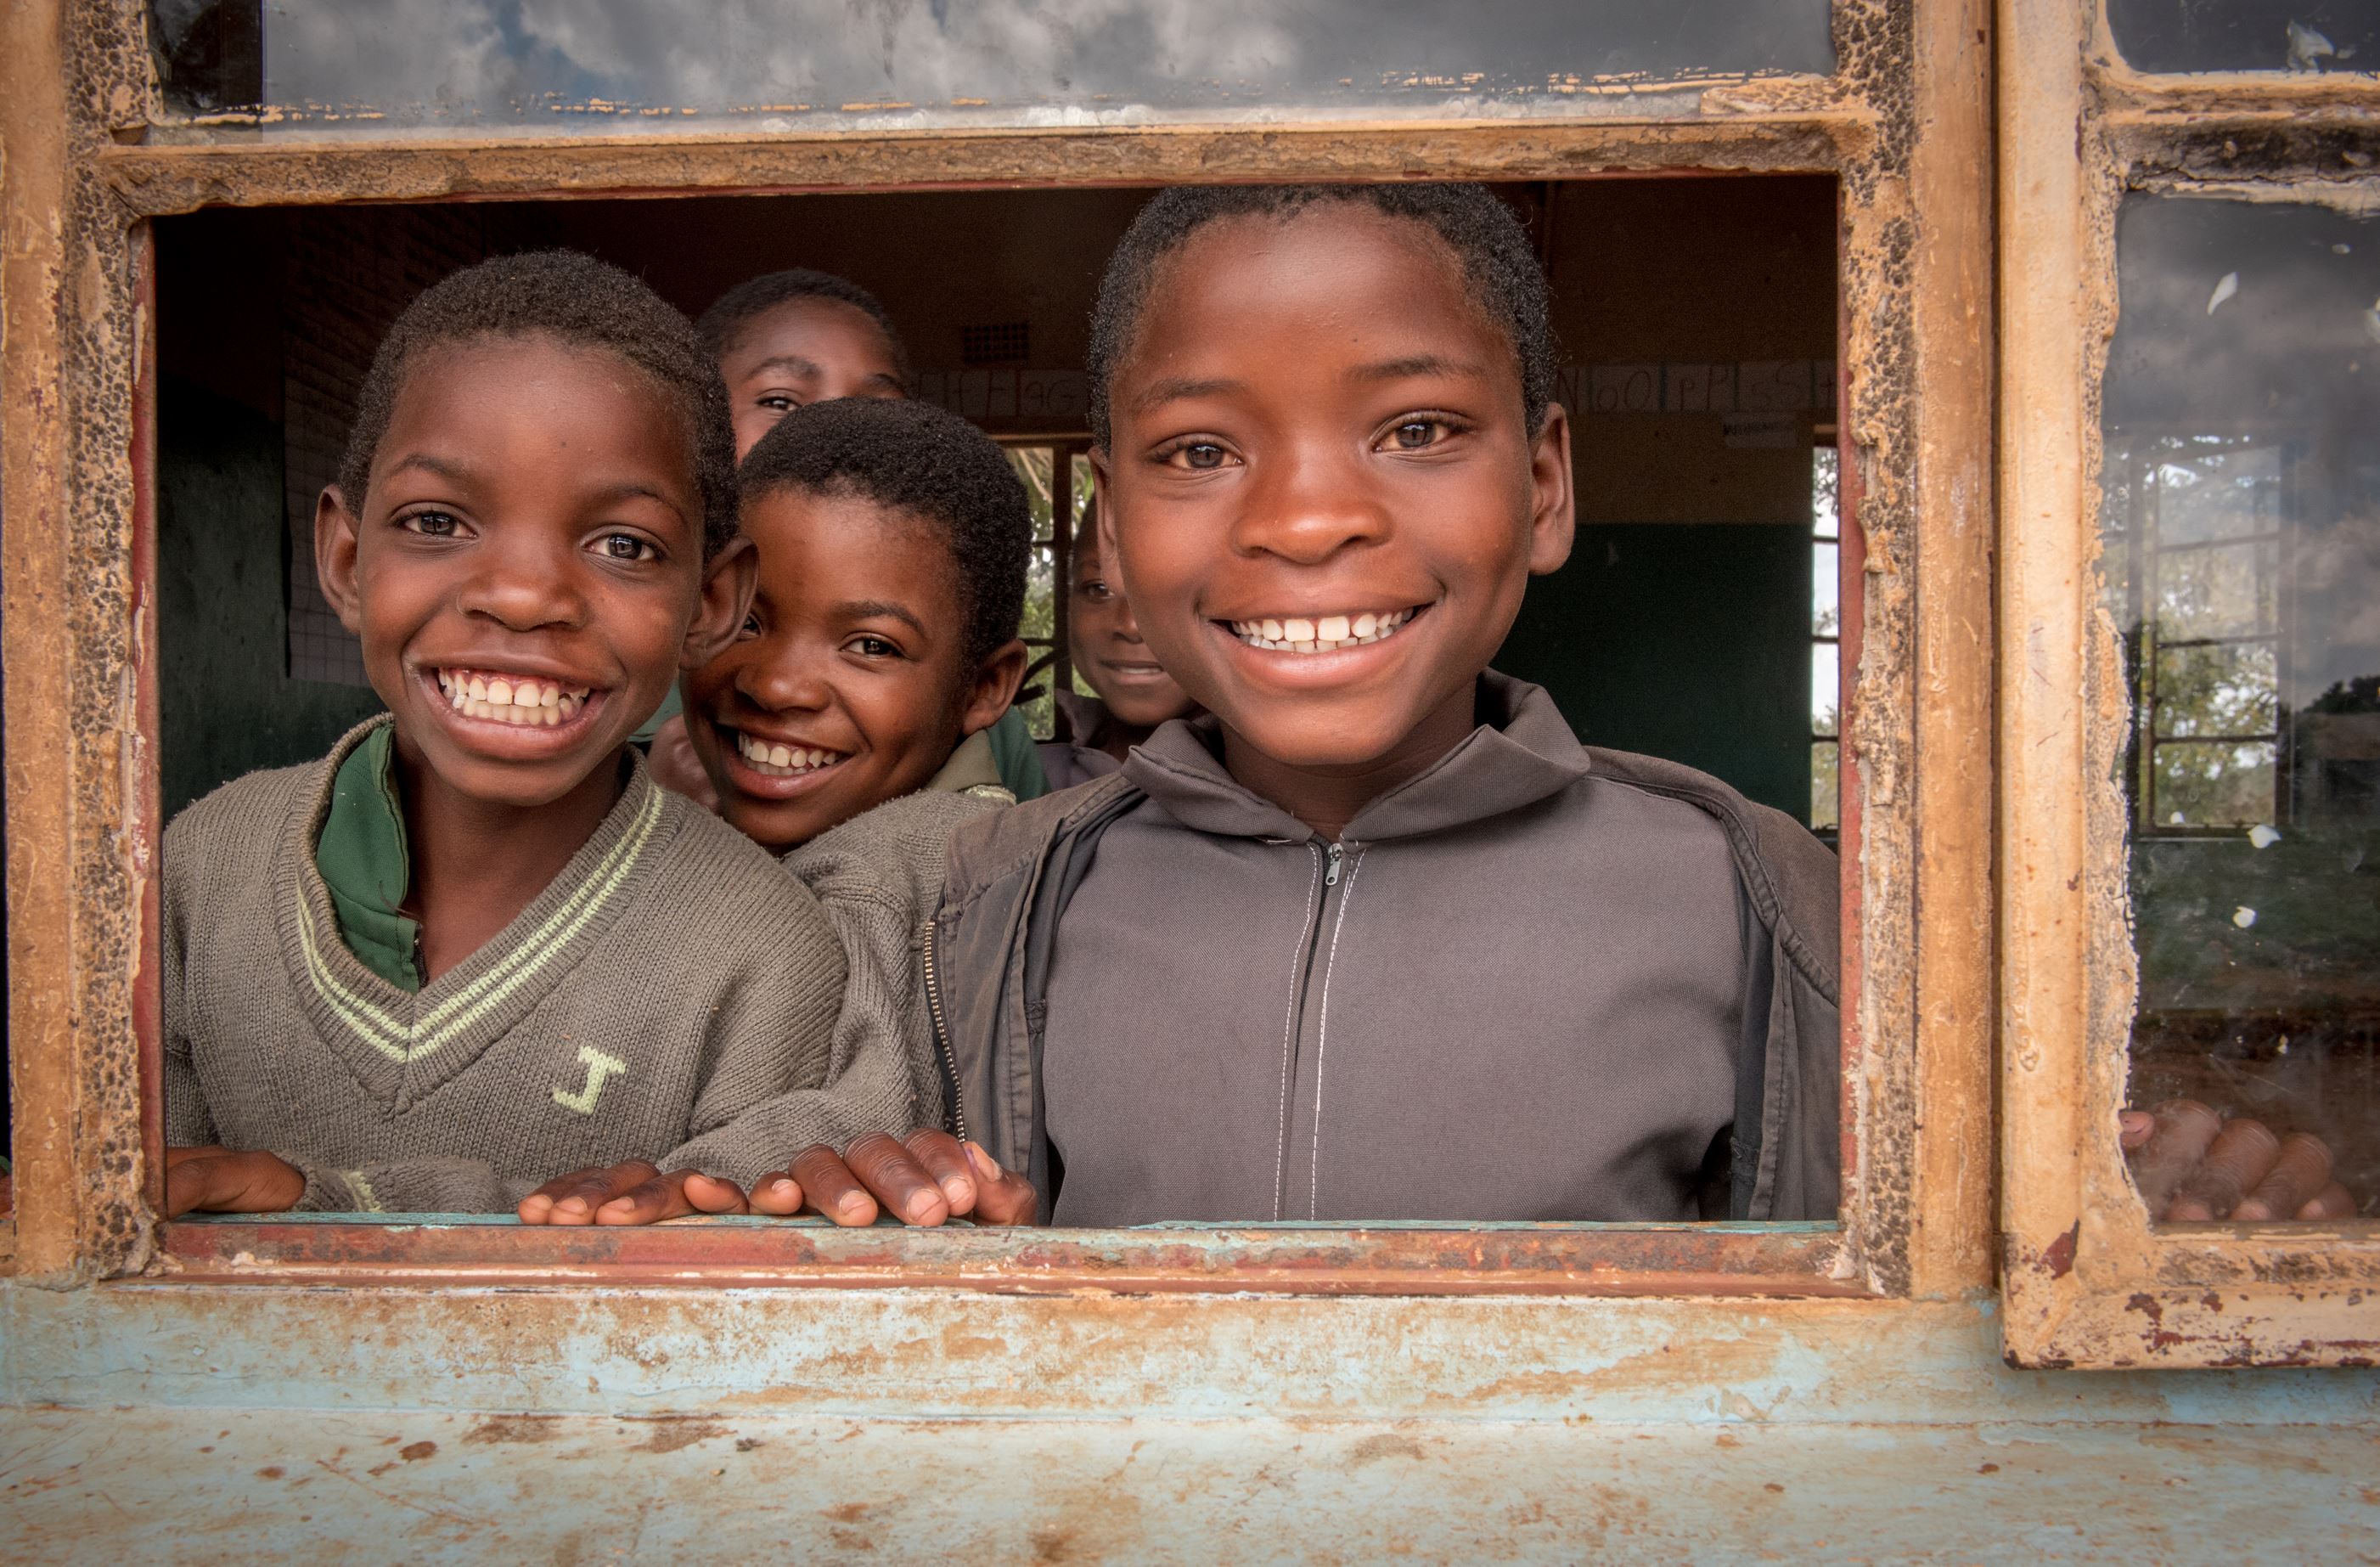 School children peering out of a window, smiling 